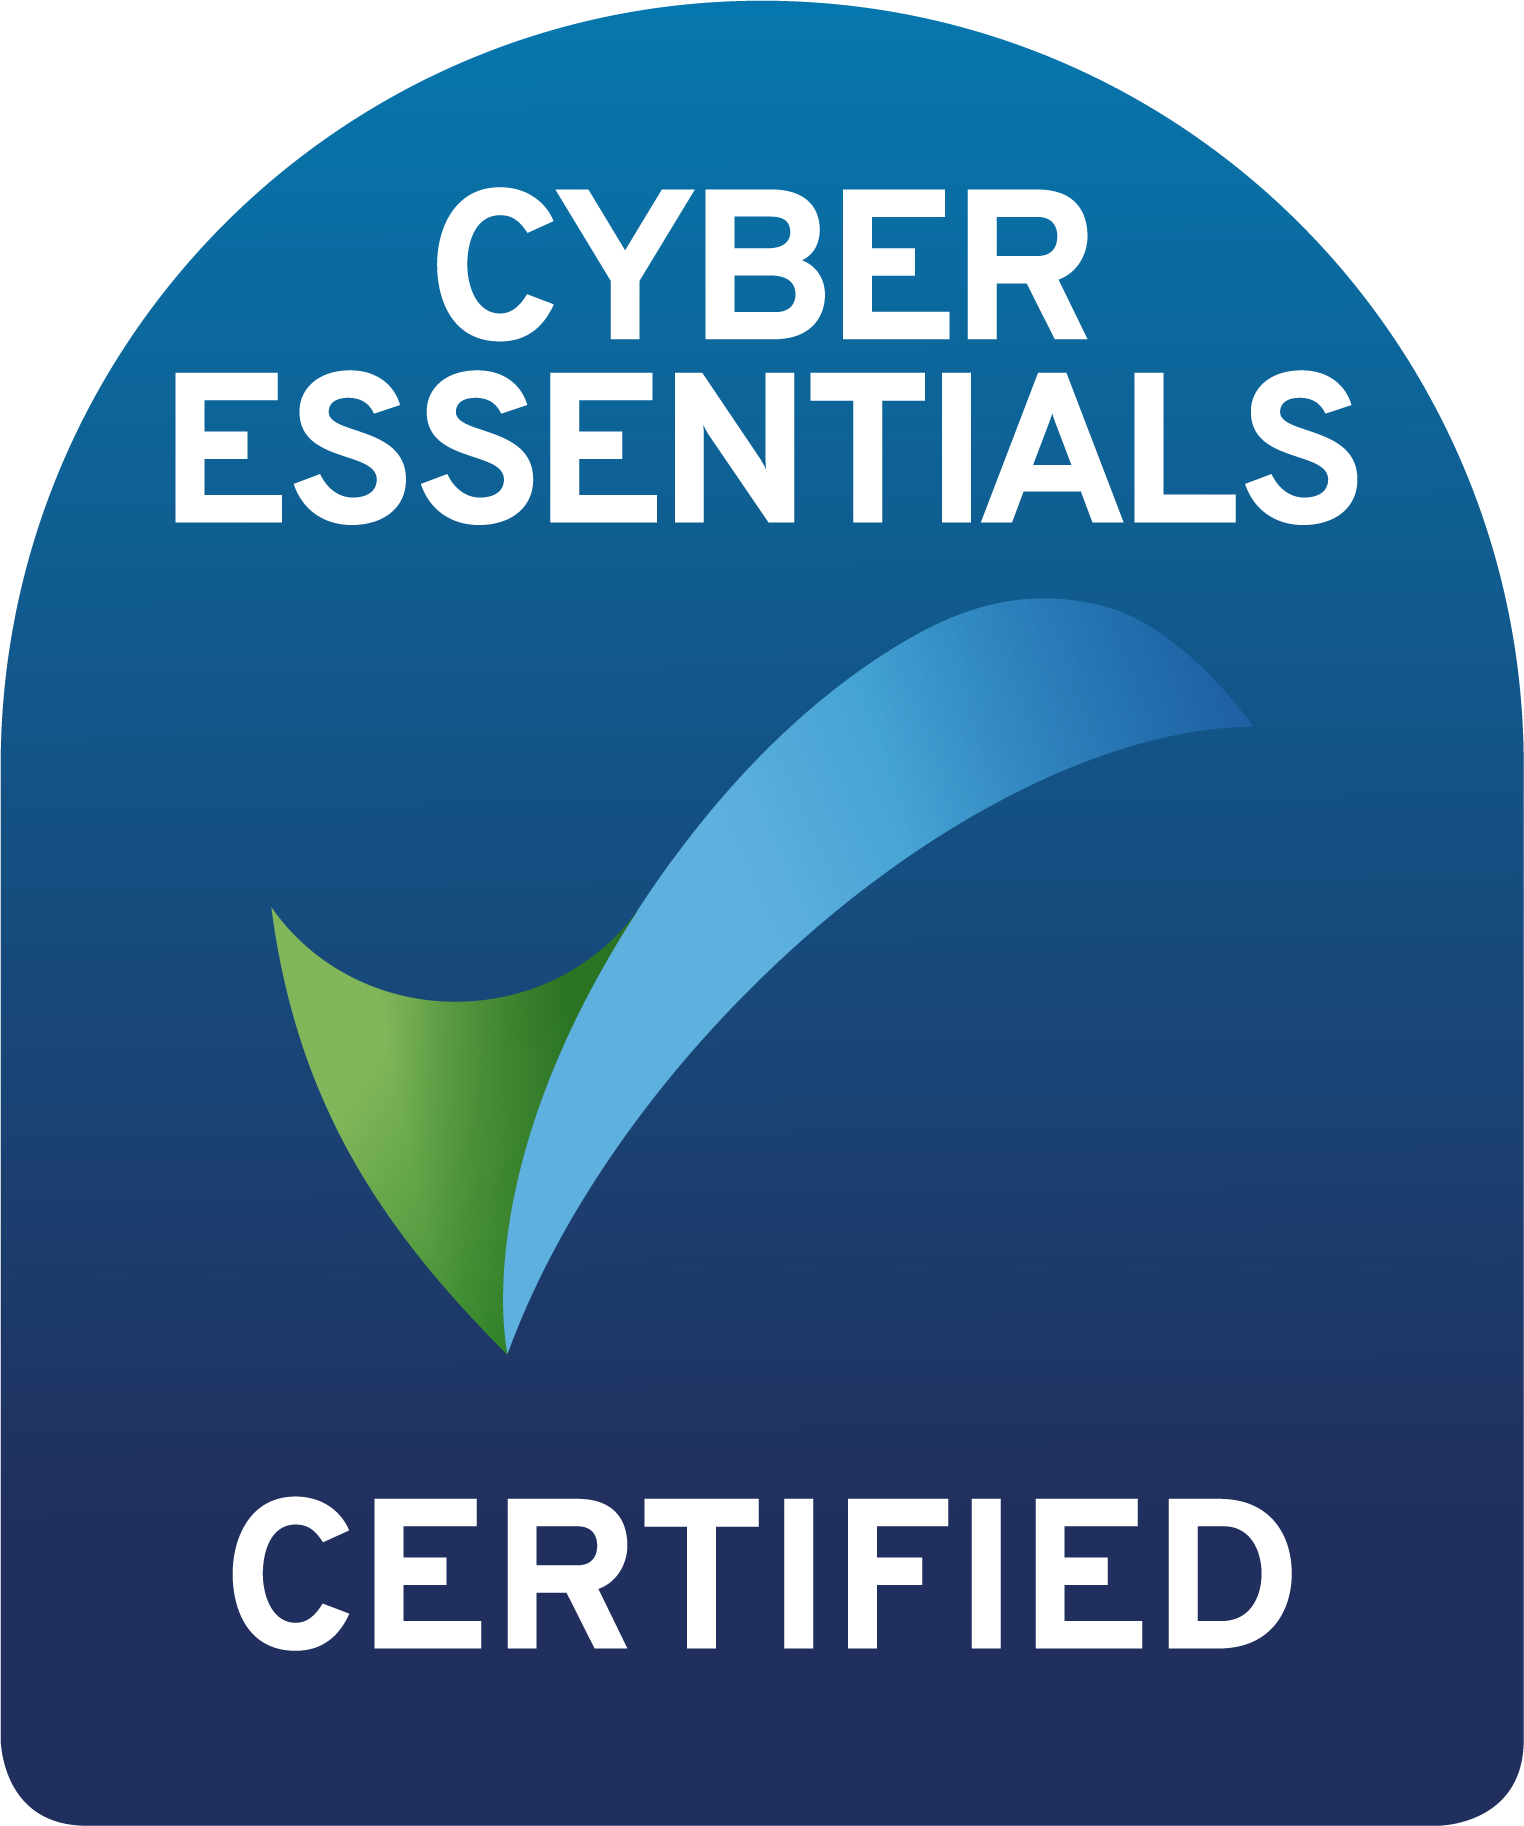 RUGGED Mobile Systems are now CYBER ESSENTIALS Certified